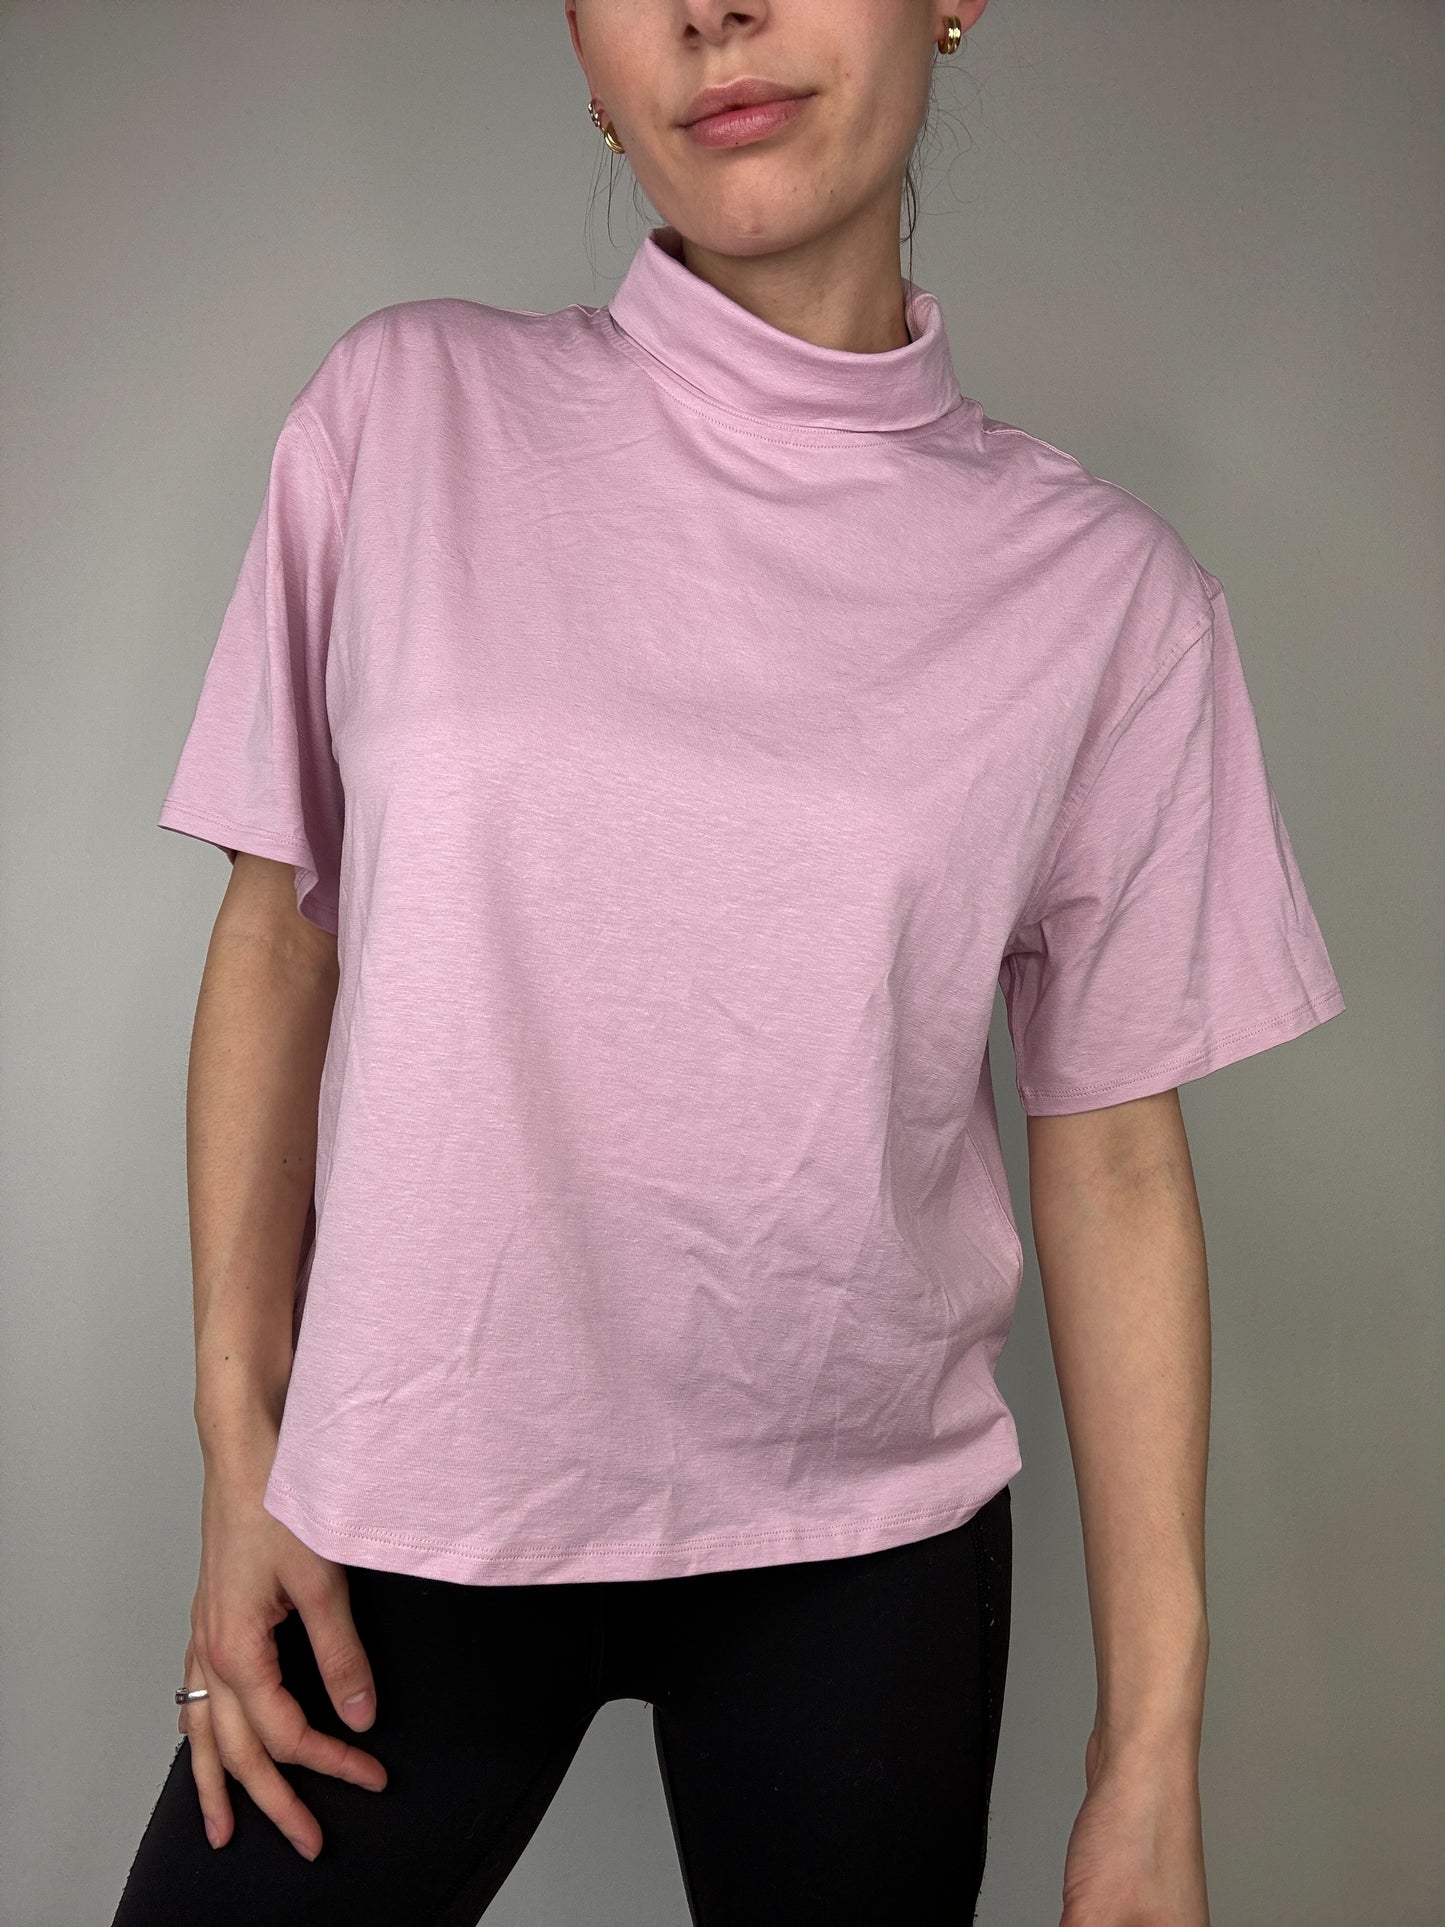 Lululemon Relaxed-Fit T-Shirt (6)